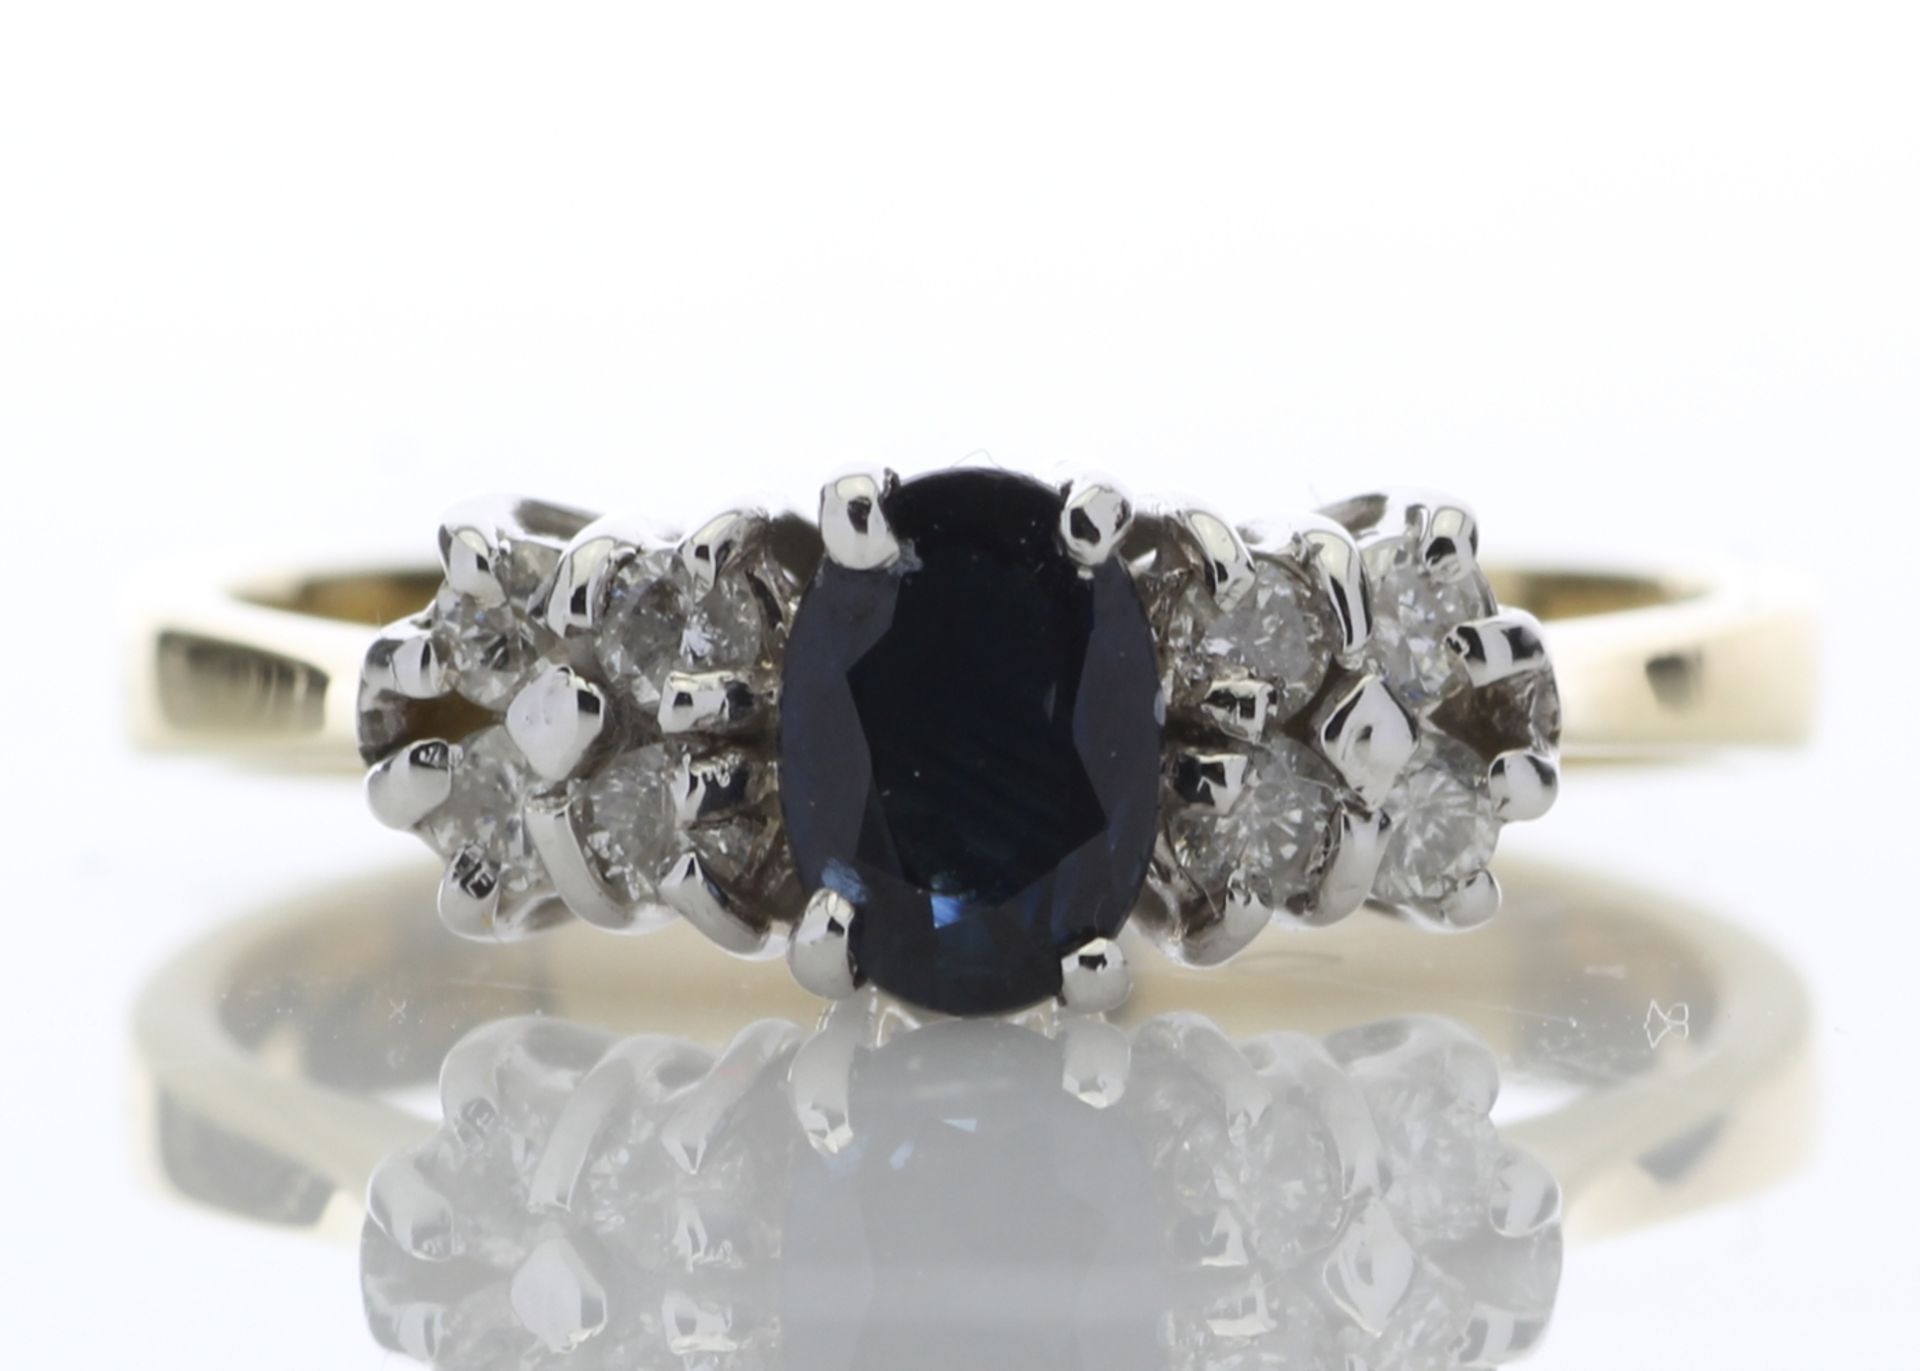 18ct Boat Shape Cluster Diamond Saphire Ring 0.50 Carats - Valued By GIE £4,700.00 - A beautiful